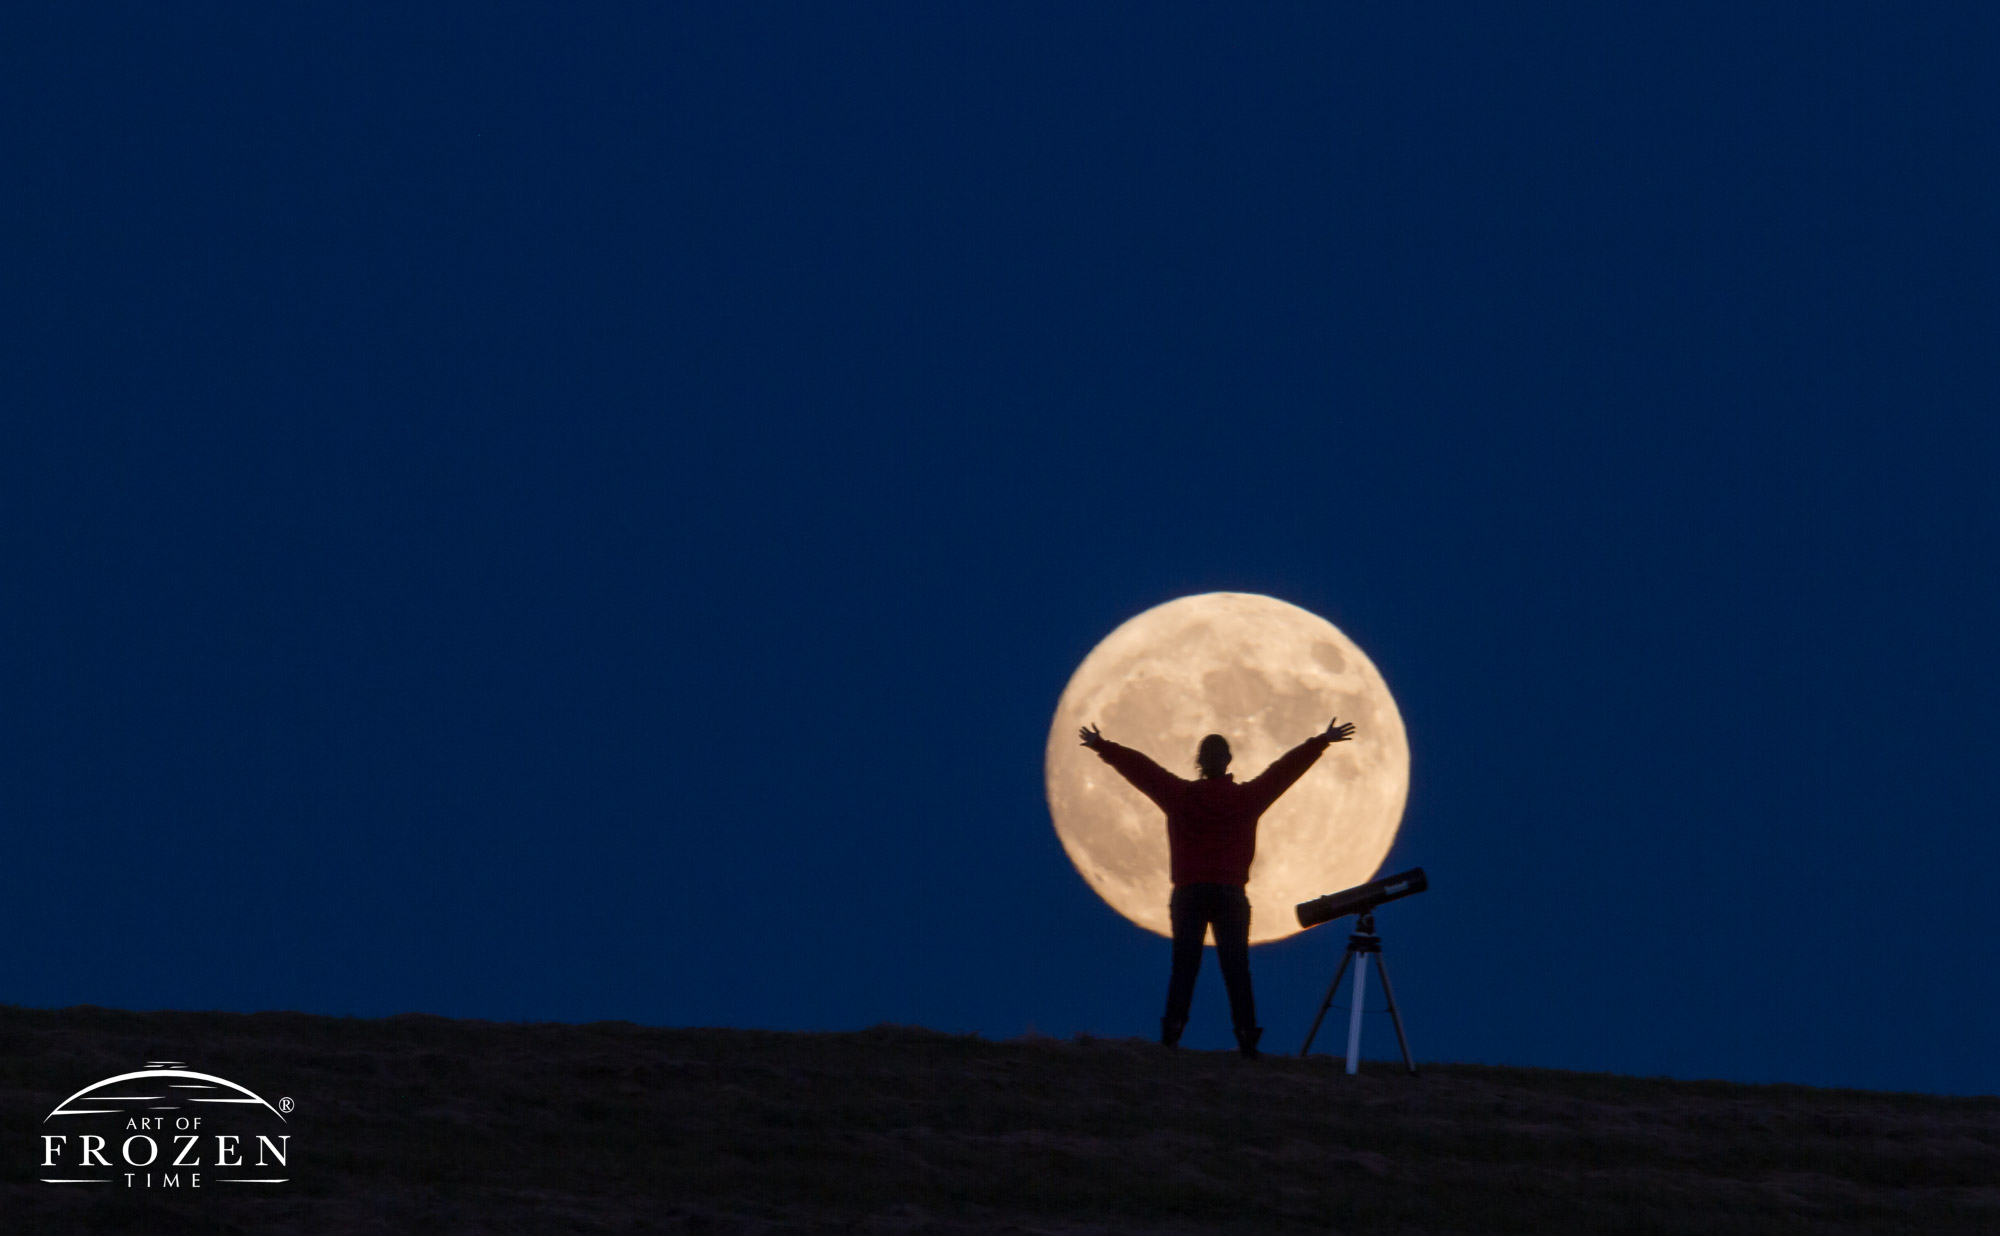 A telephoto view of a girl in front of a giant full moon where the silhoutte reveals her outstretched arms and a nearby telescope